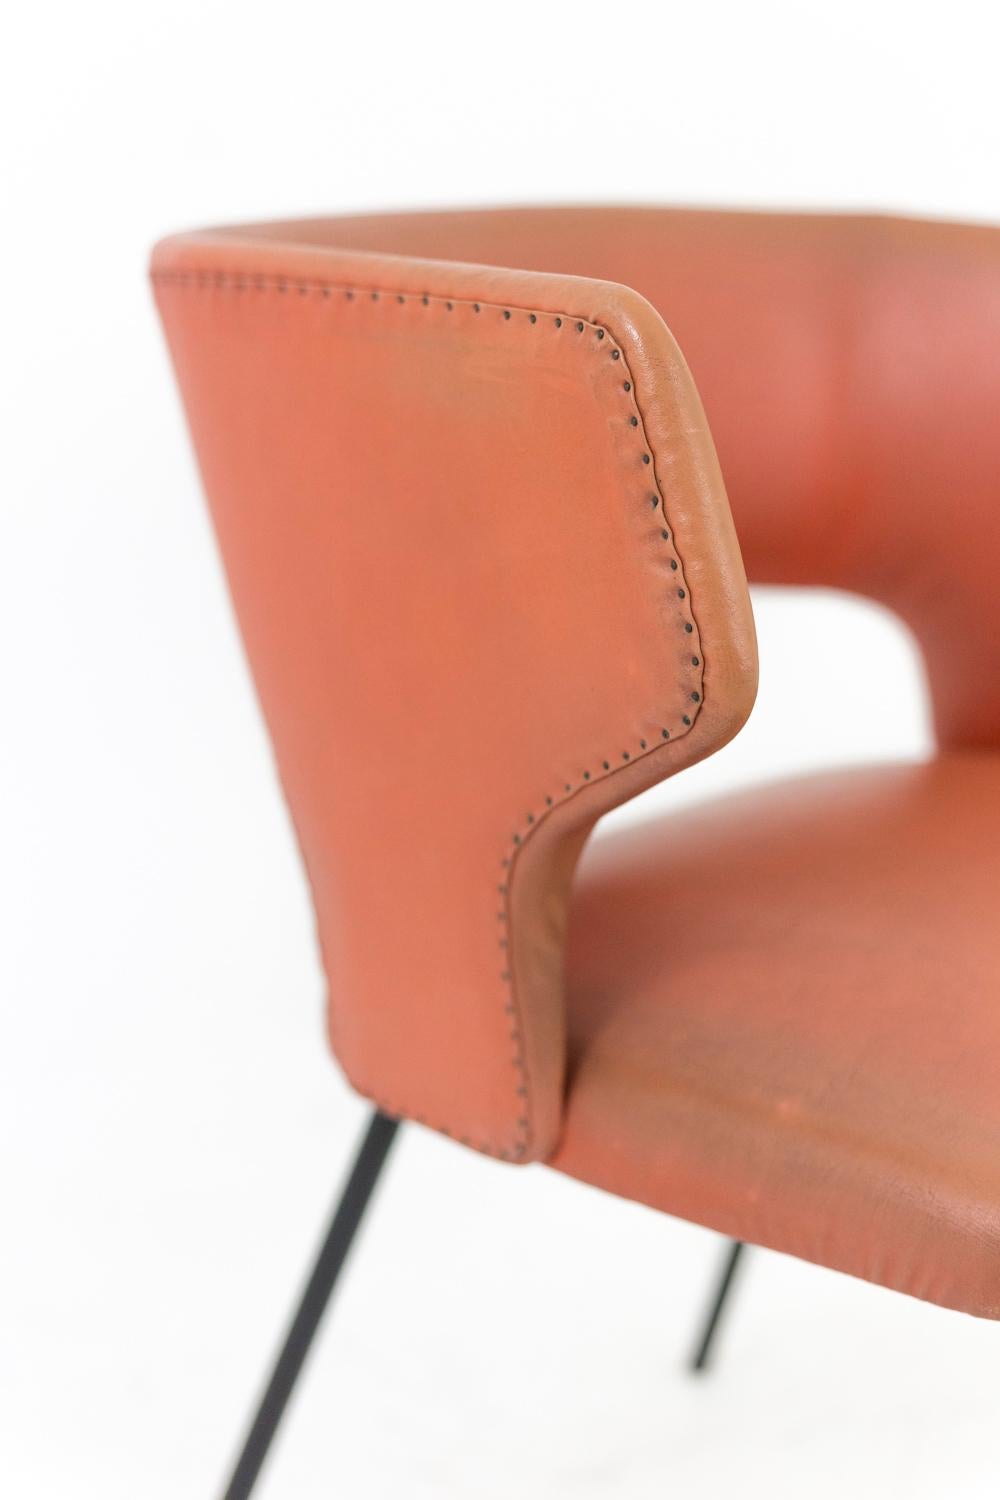 Armchair in Orange Skai and Black Lacquered Metal, 1950s For Sale 1